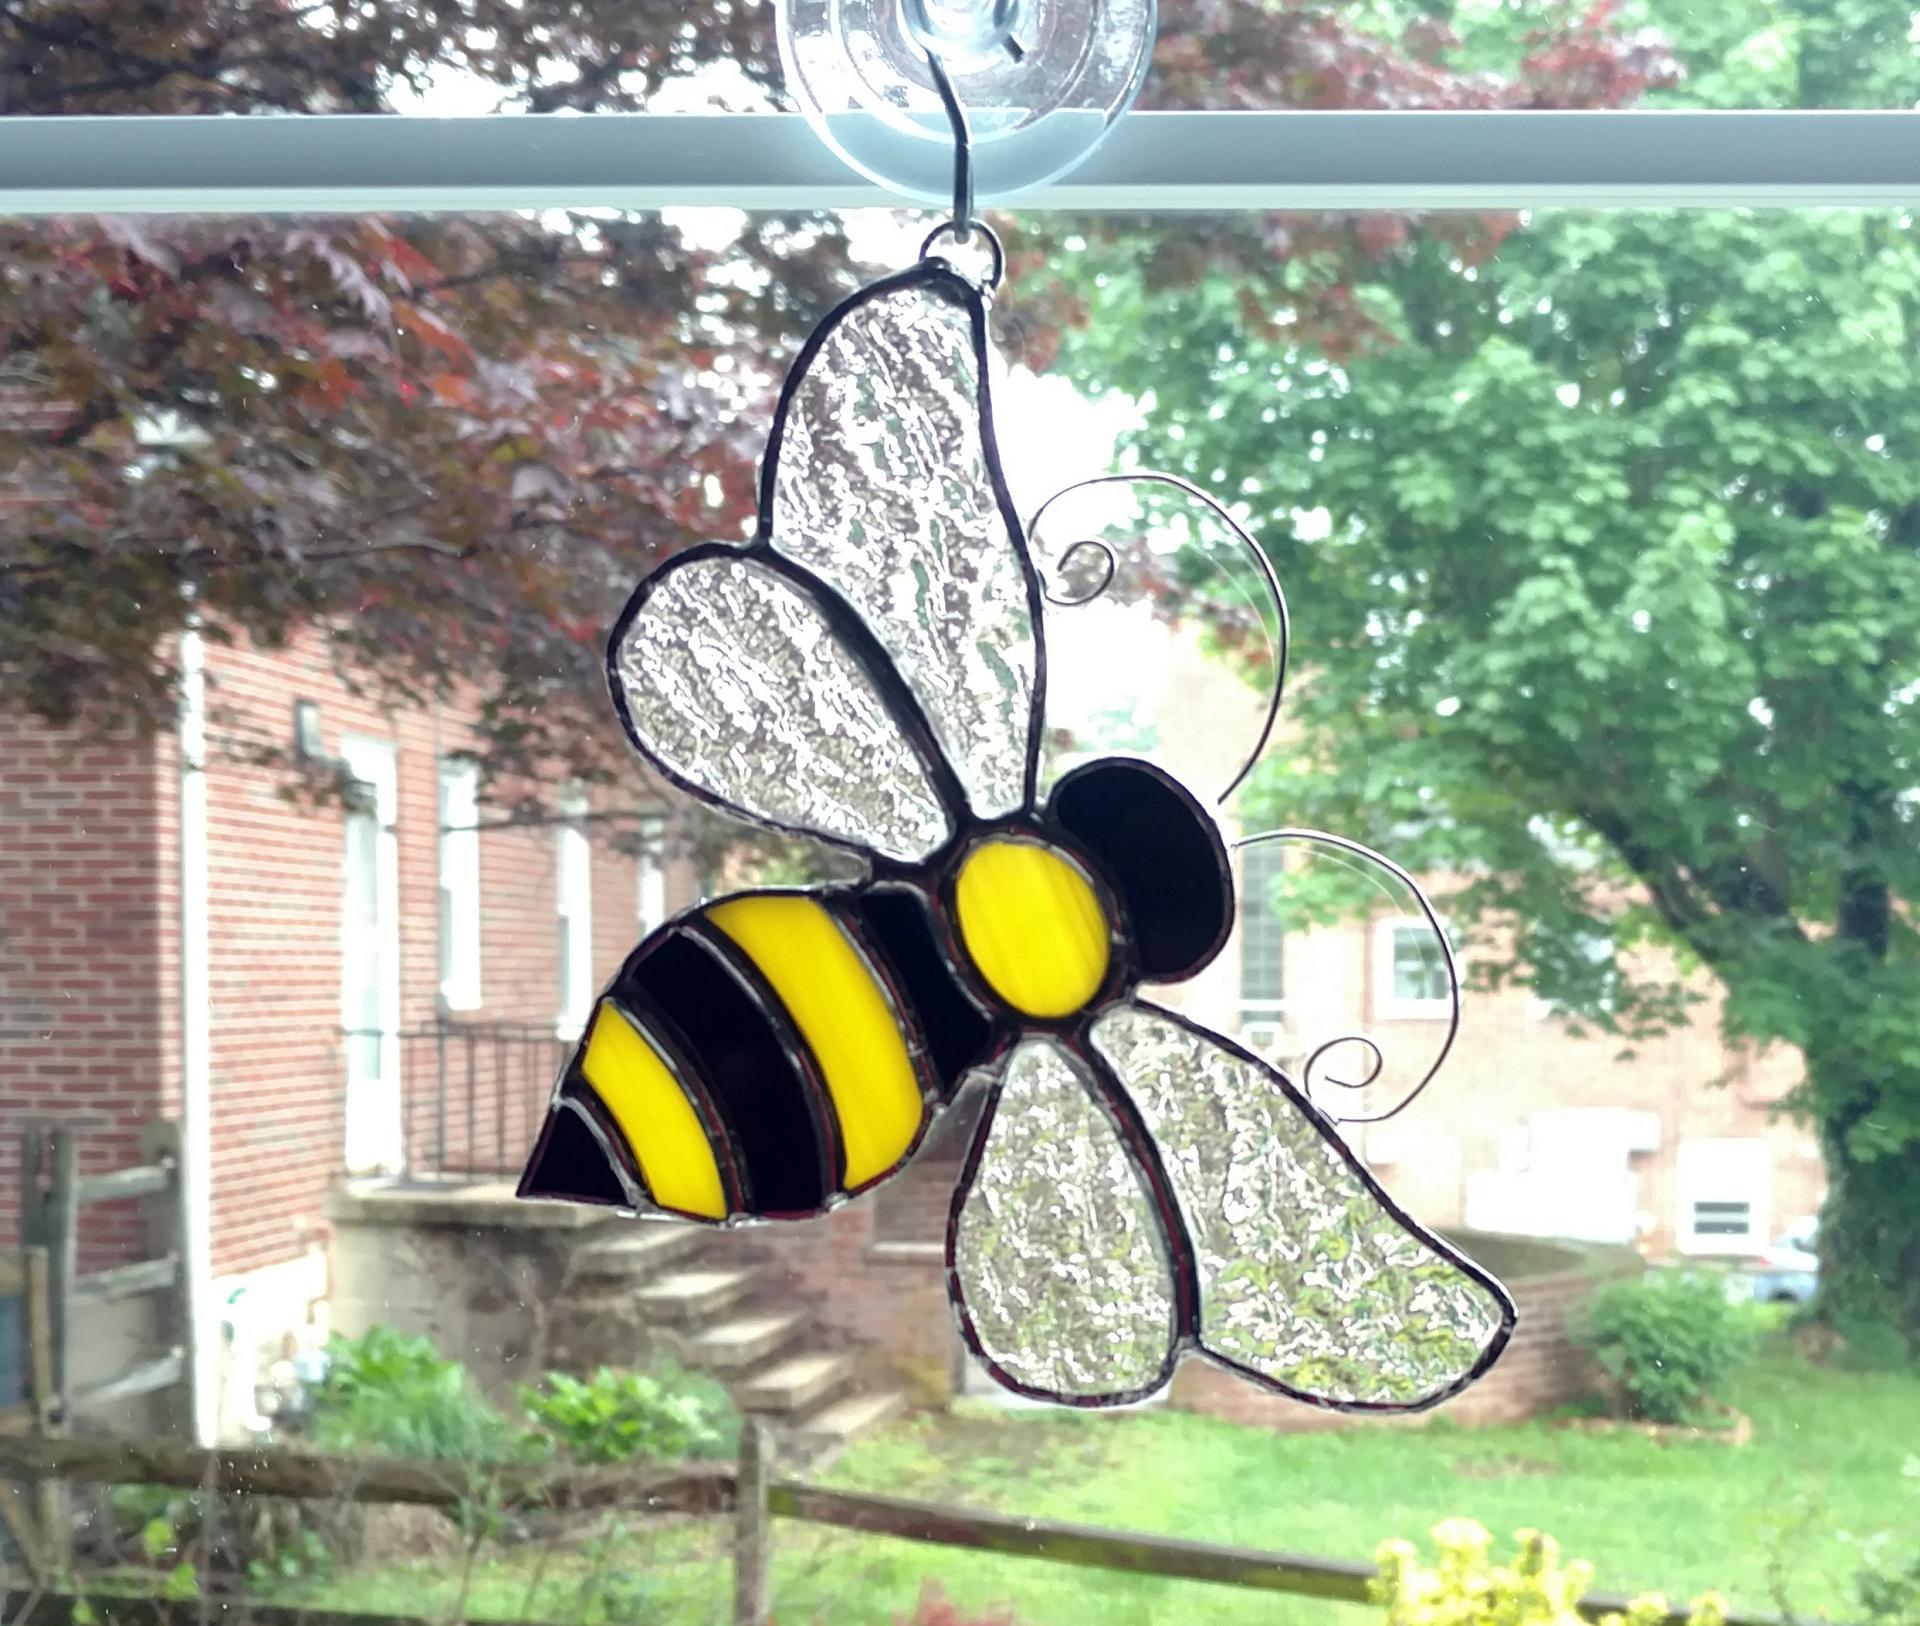 Stained glass bumble bee suncatcher made with black and yellow opalescent art glass for the body and clear textured cathedral glass for the wings.  Curled wire antennae are attached and comes with a suction cup hanger. Measures six inches by five inches.